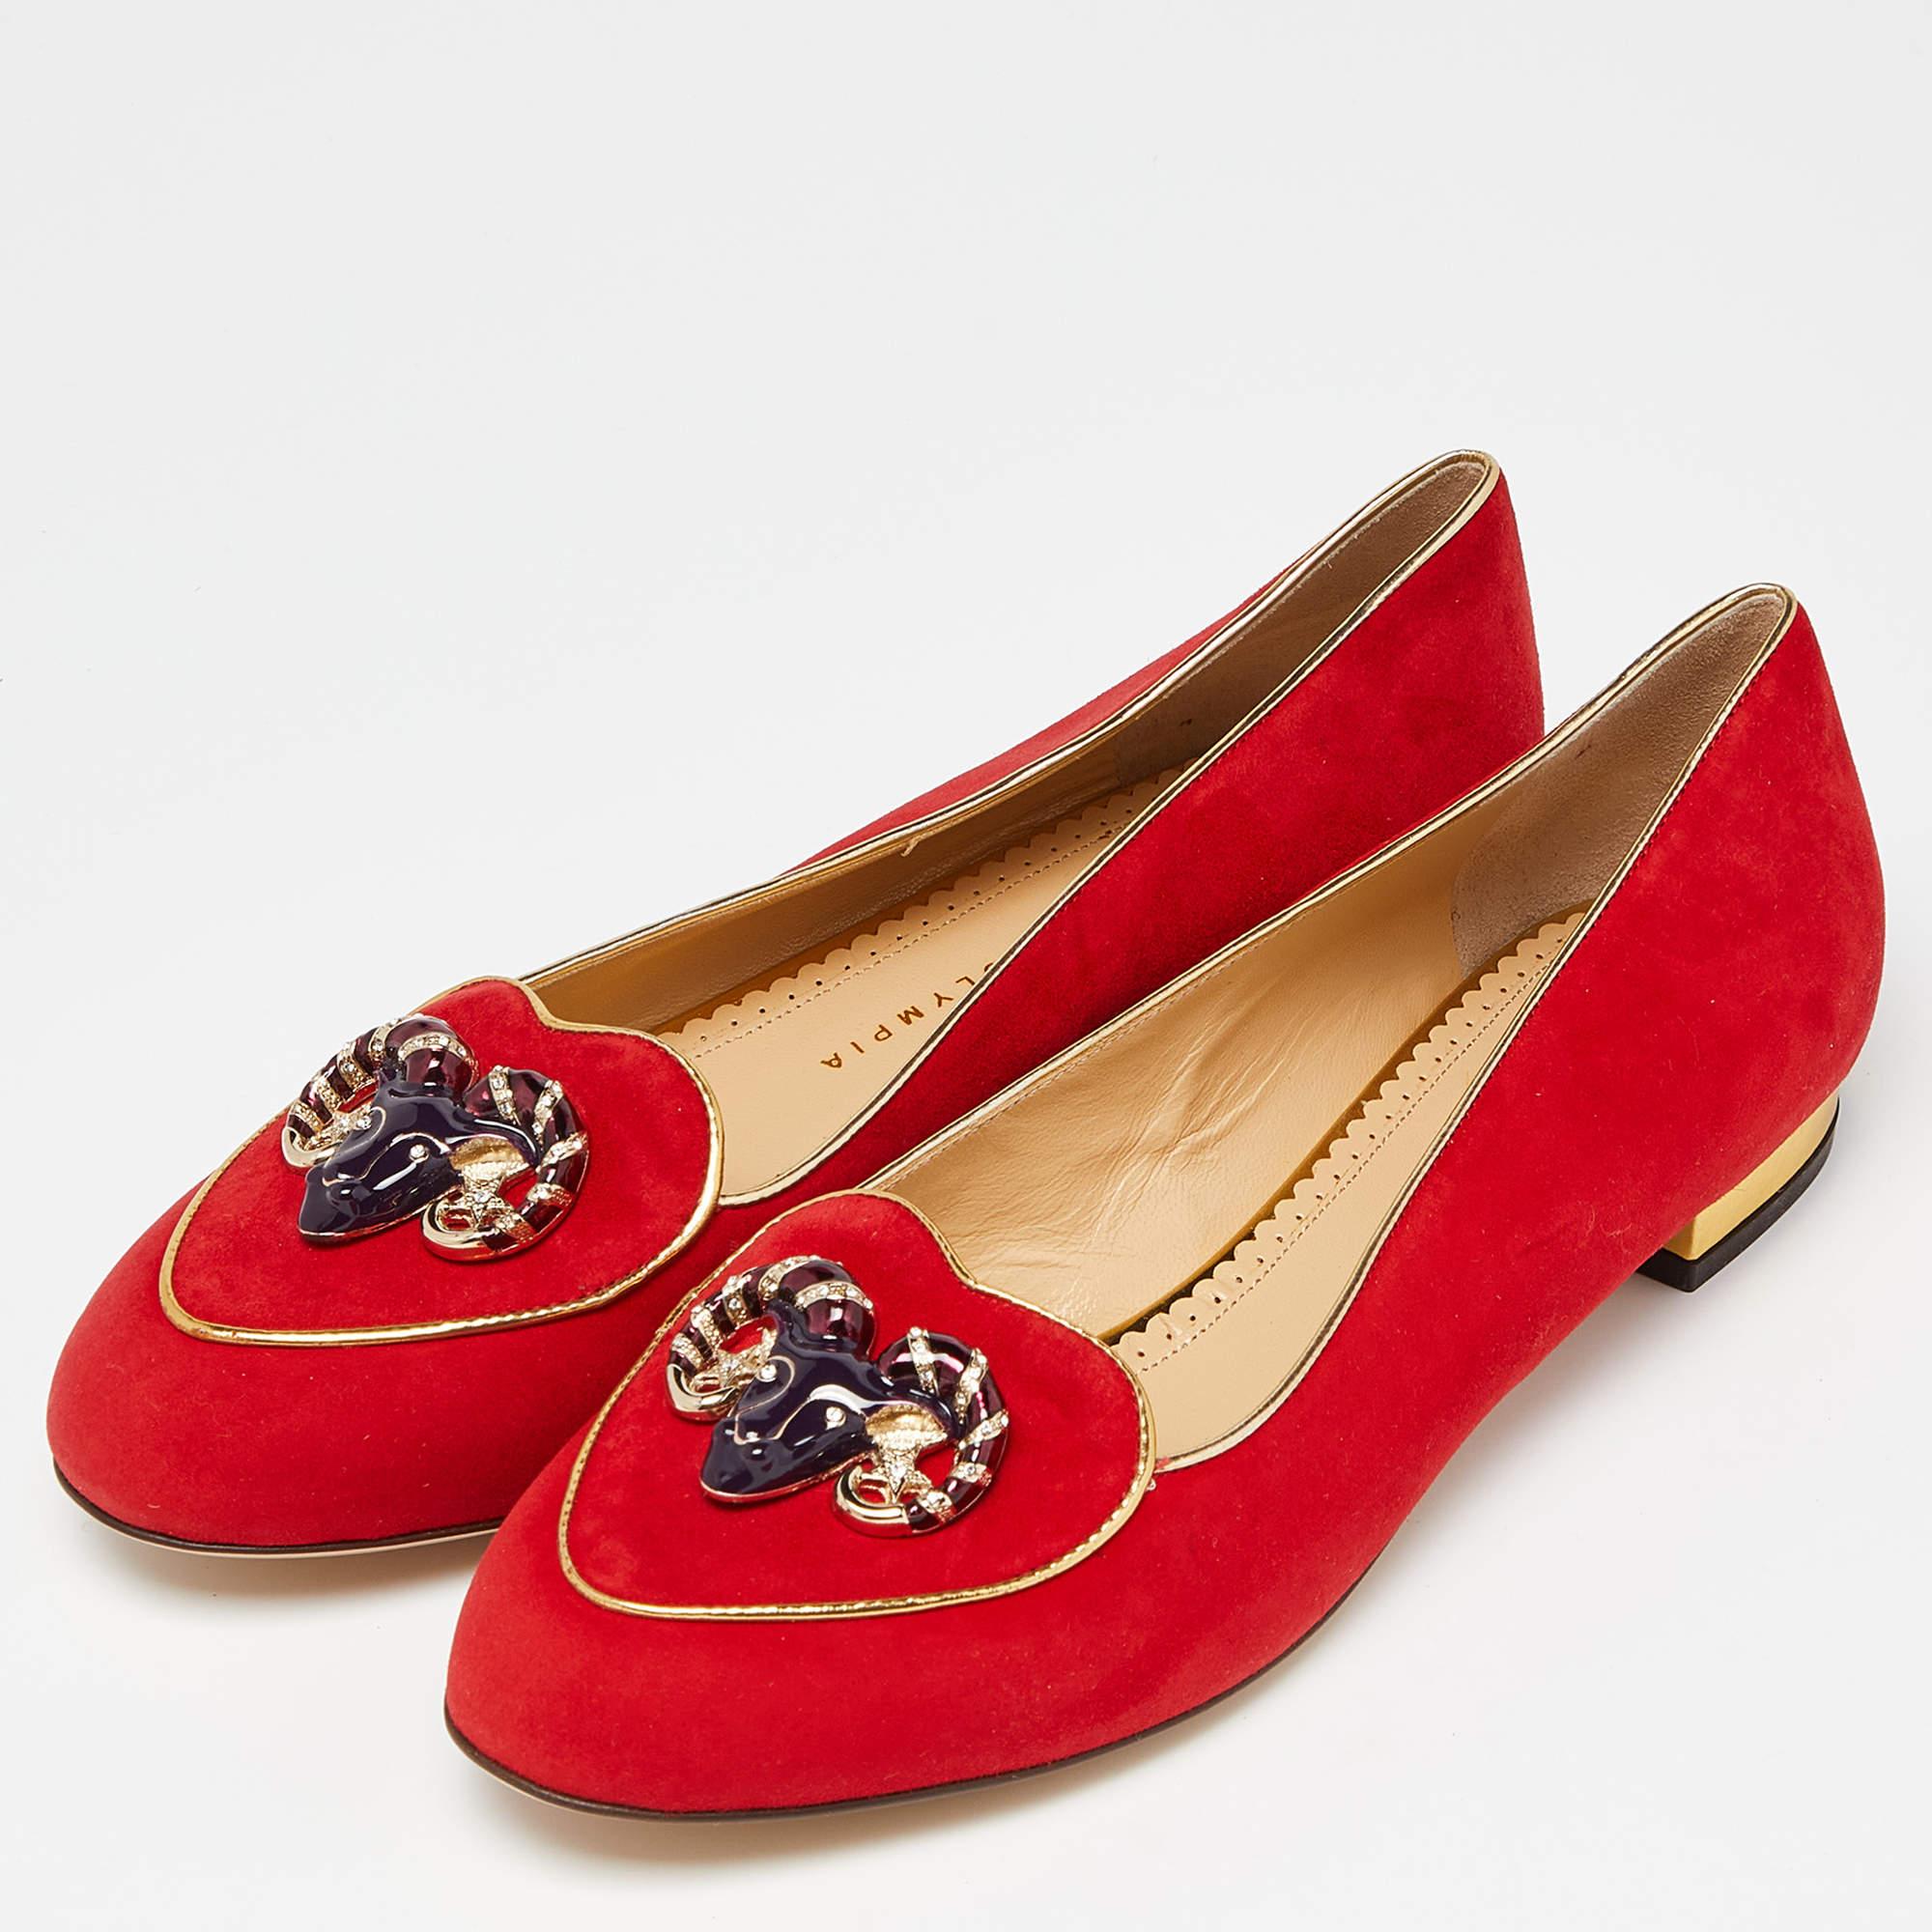 We love these Charlotte Olympia smoking slippers from the Cosmic collection. Made from red-colored suede, they feature Aries bull zodiac symbols that are embellished.

Includes: Original Dustbag